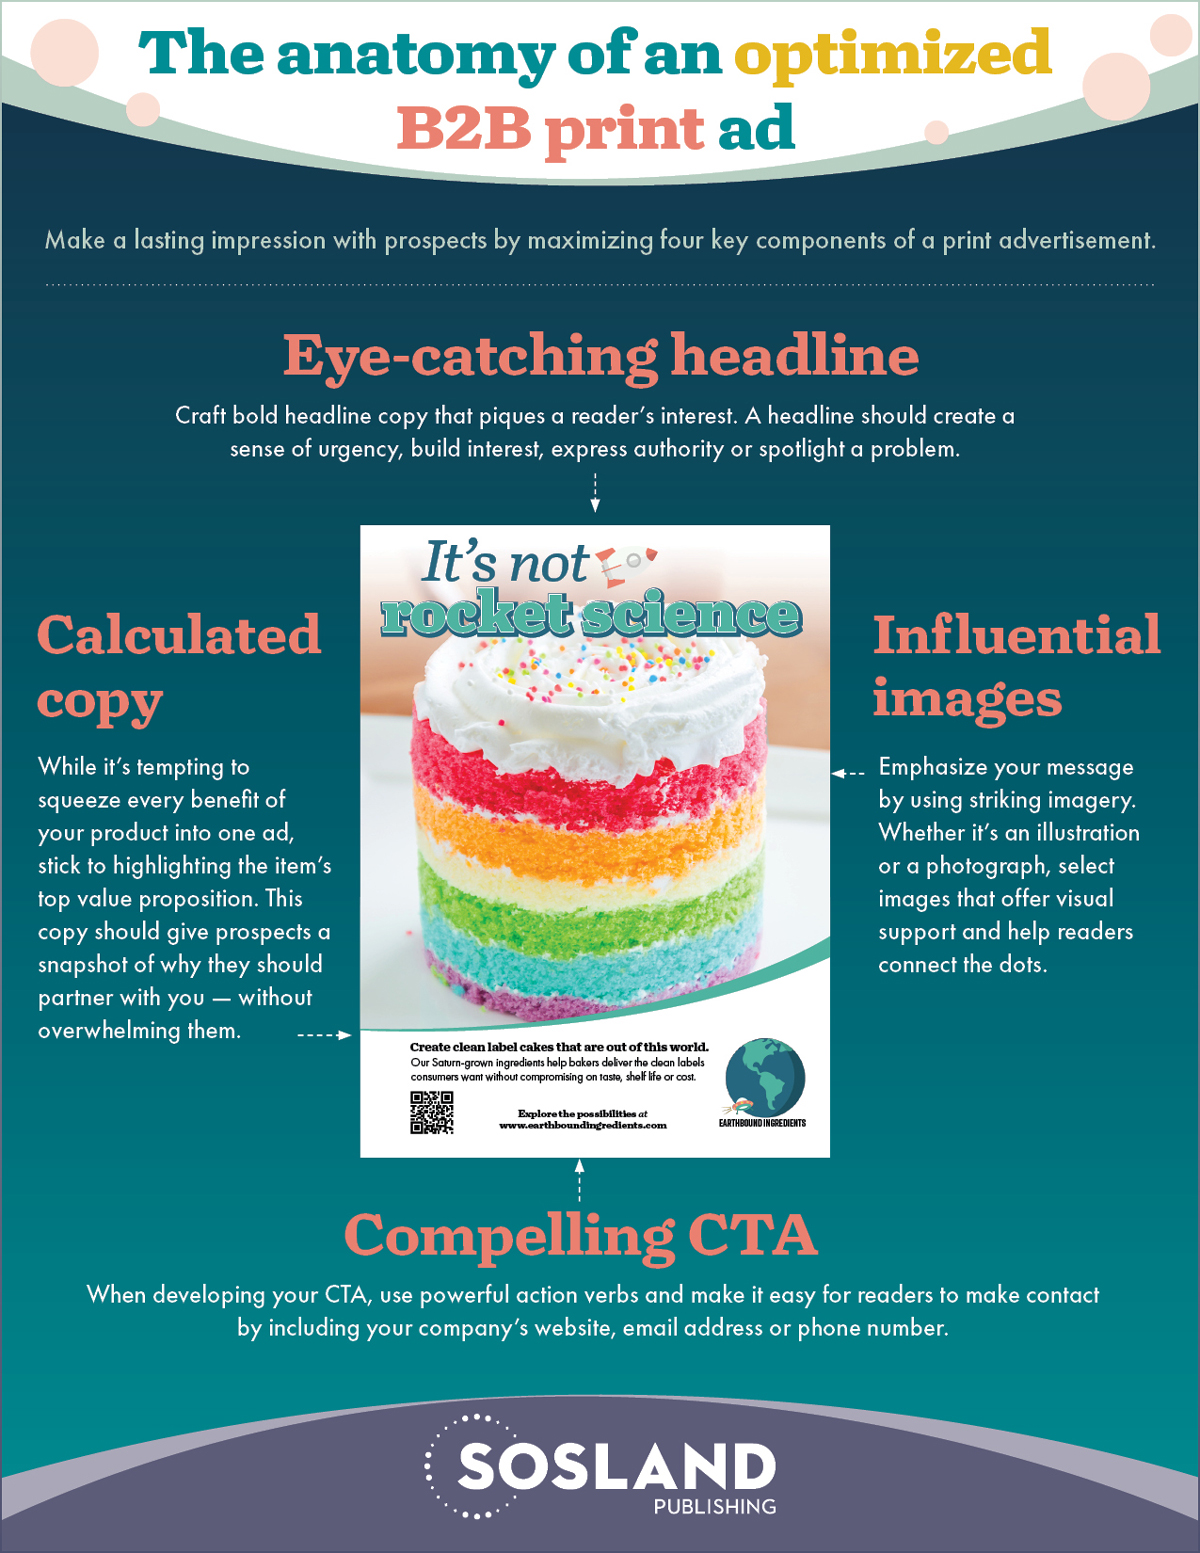 Infographic of how to optimize print advertisement.